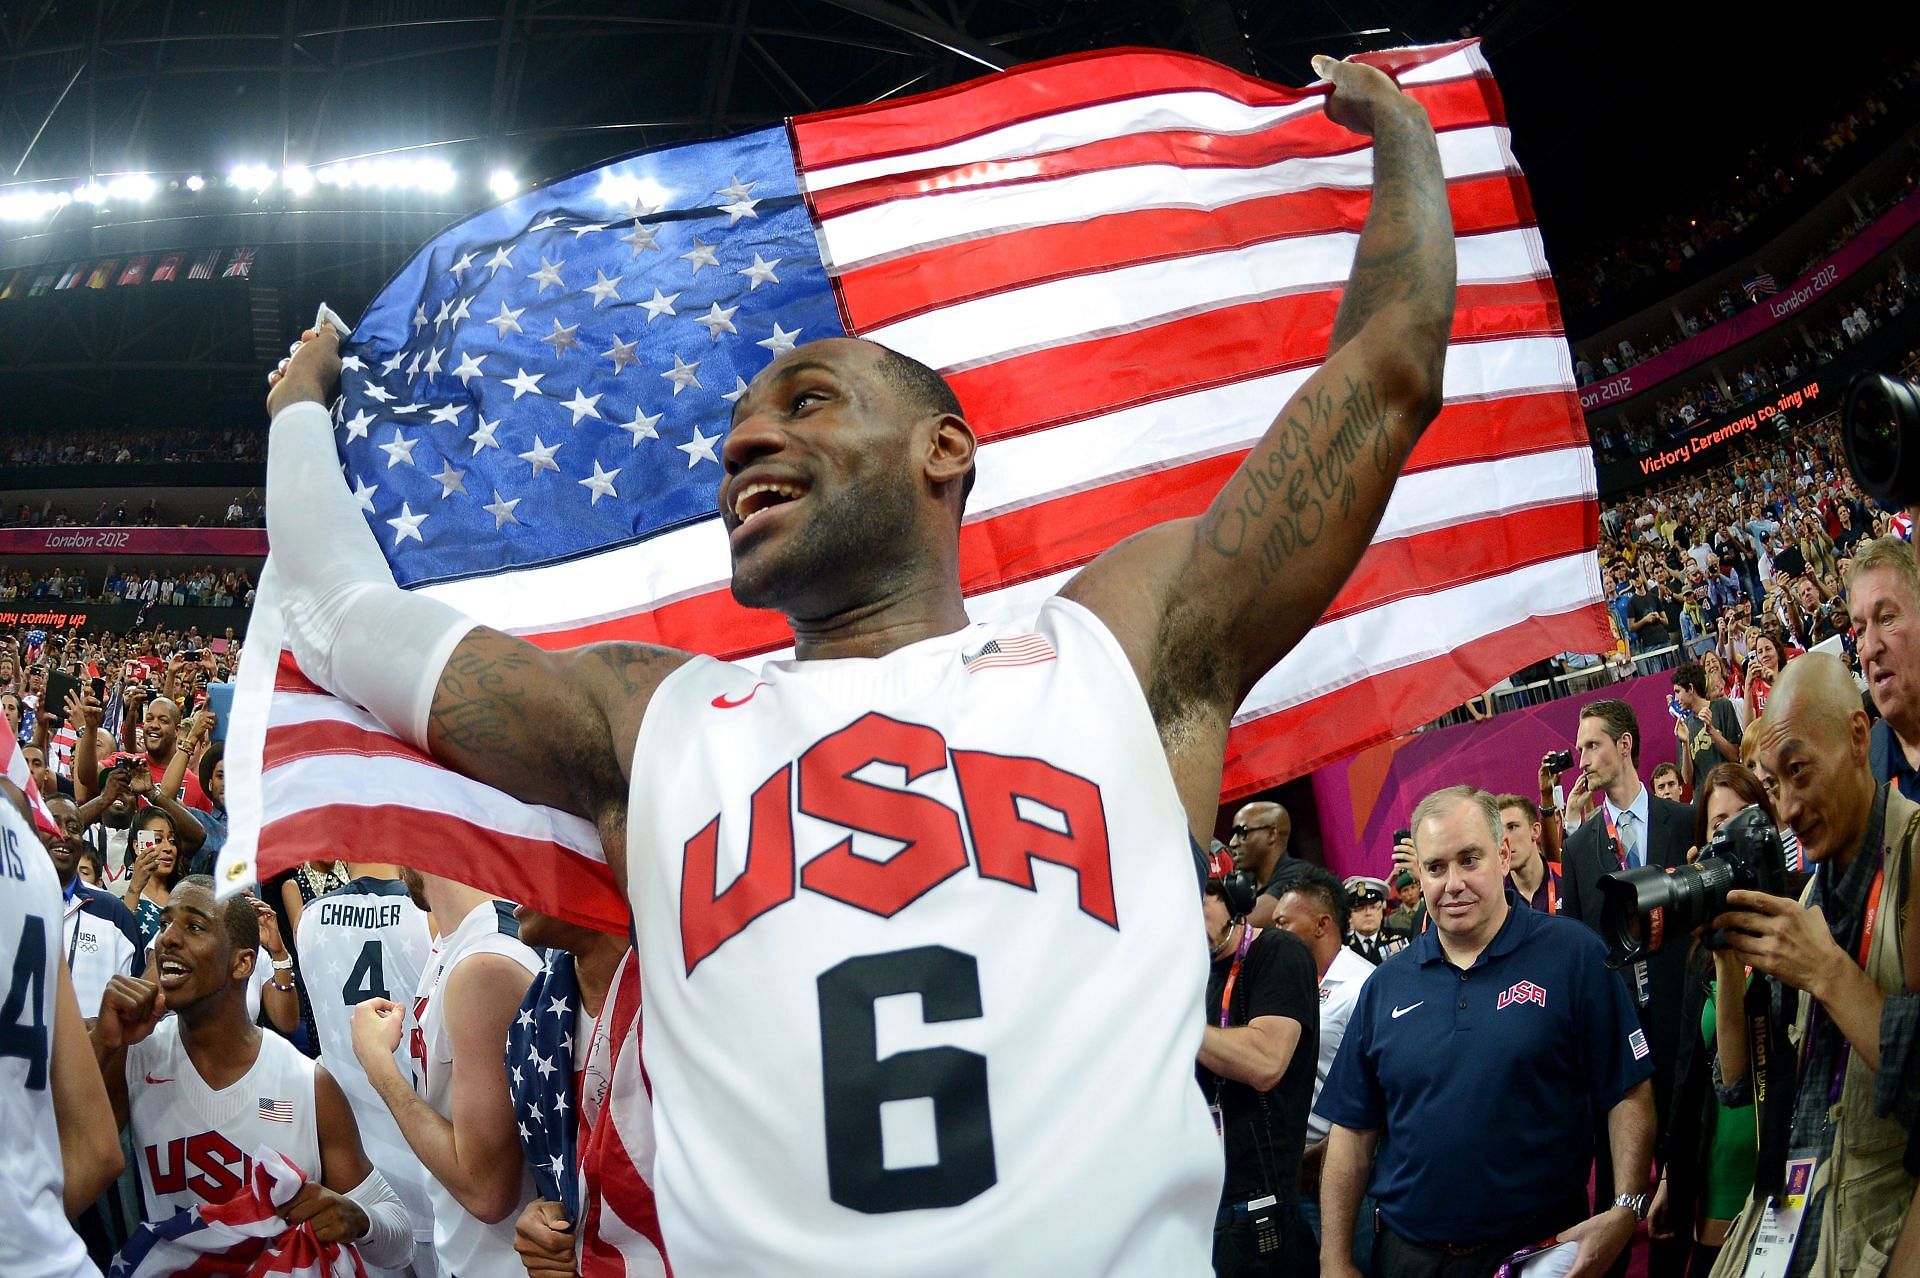 'The King is back' - LeBron James hinted at his desire to compete in the 2024 Olympics after being eliminated from the FIBA World Cup